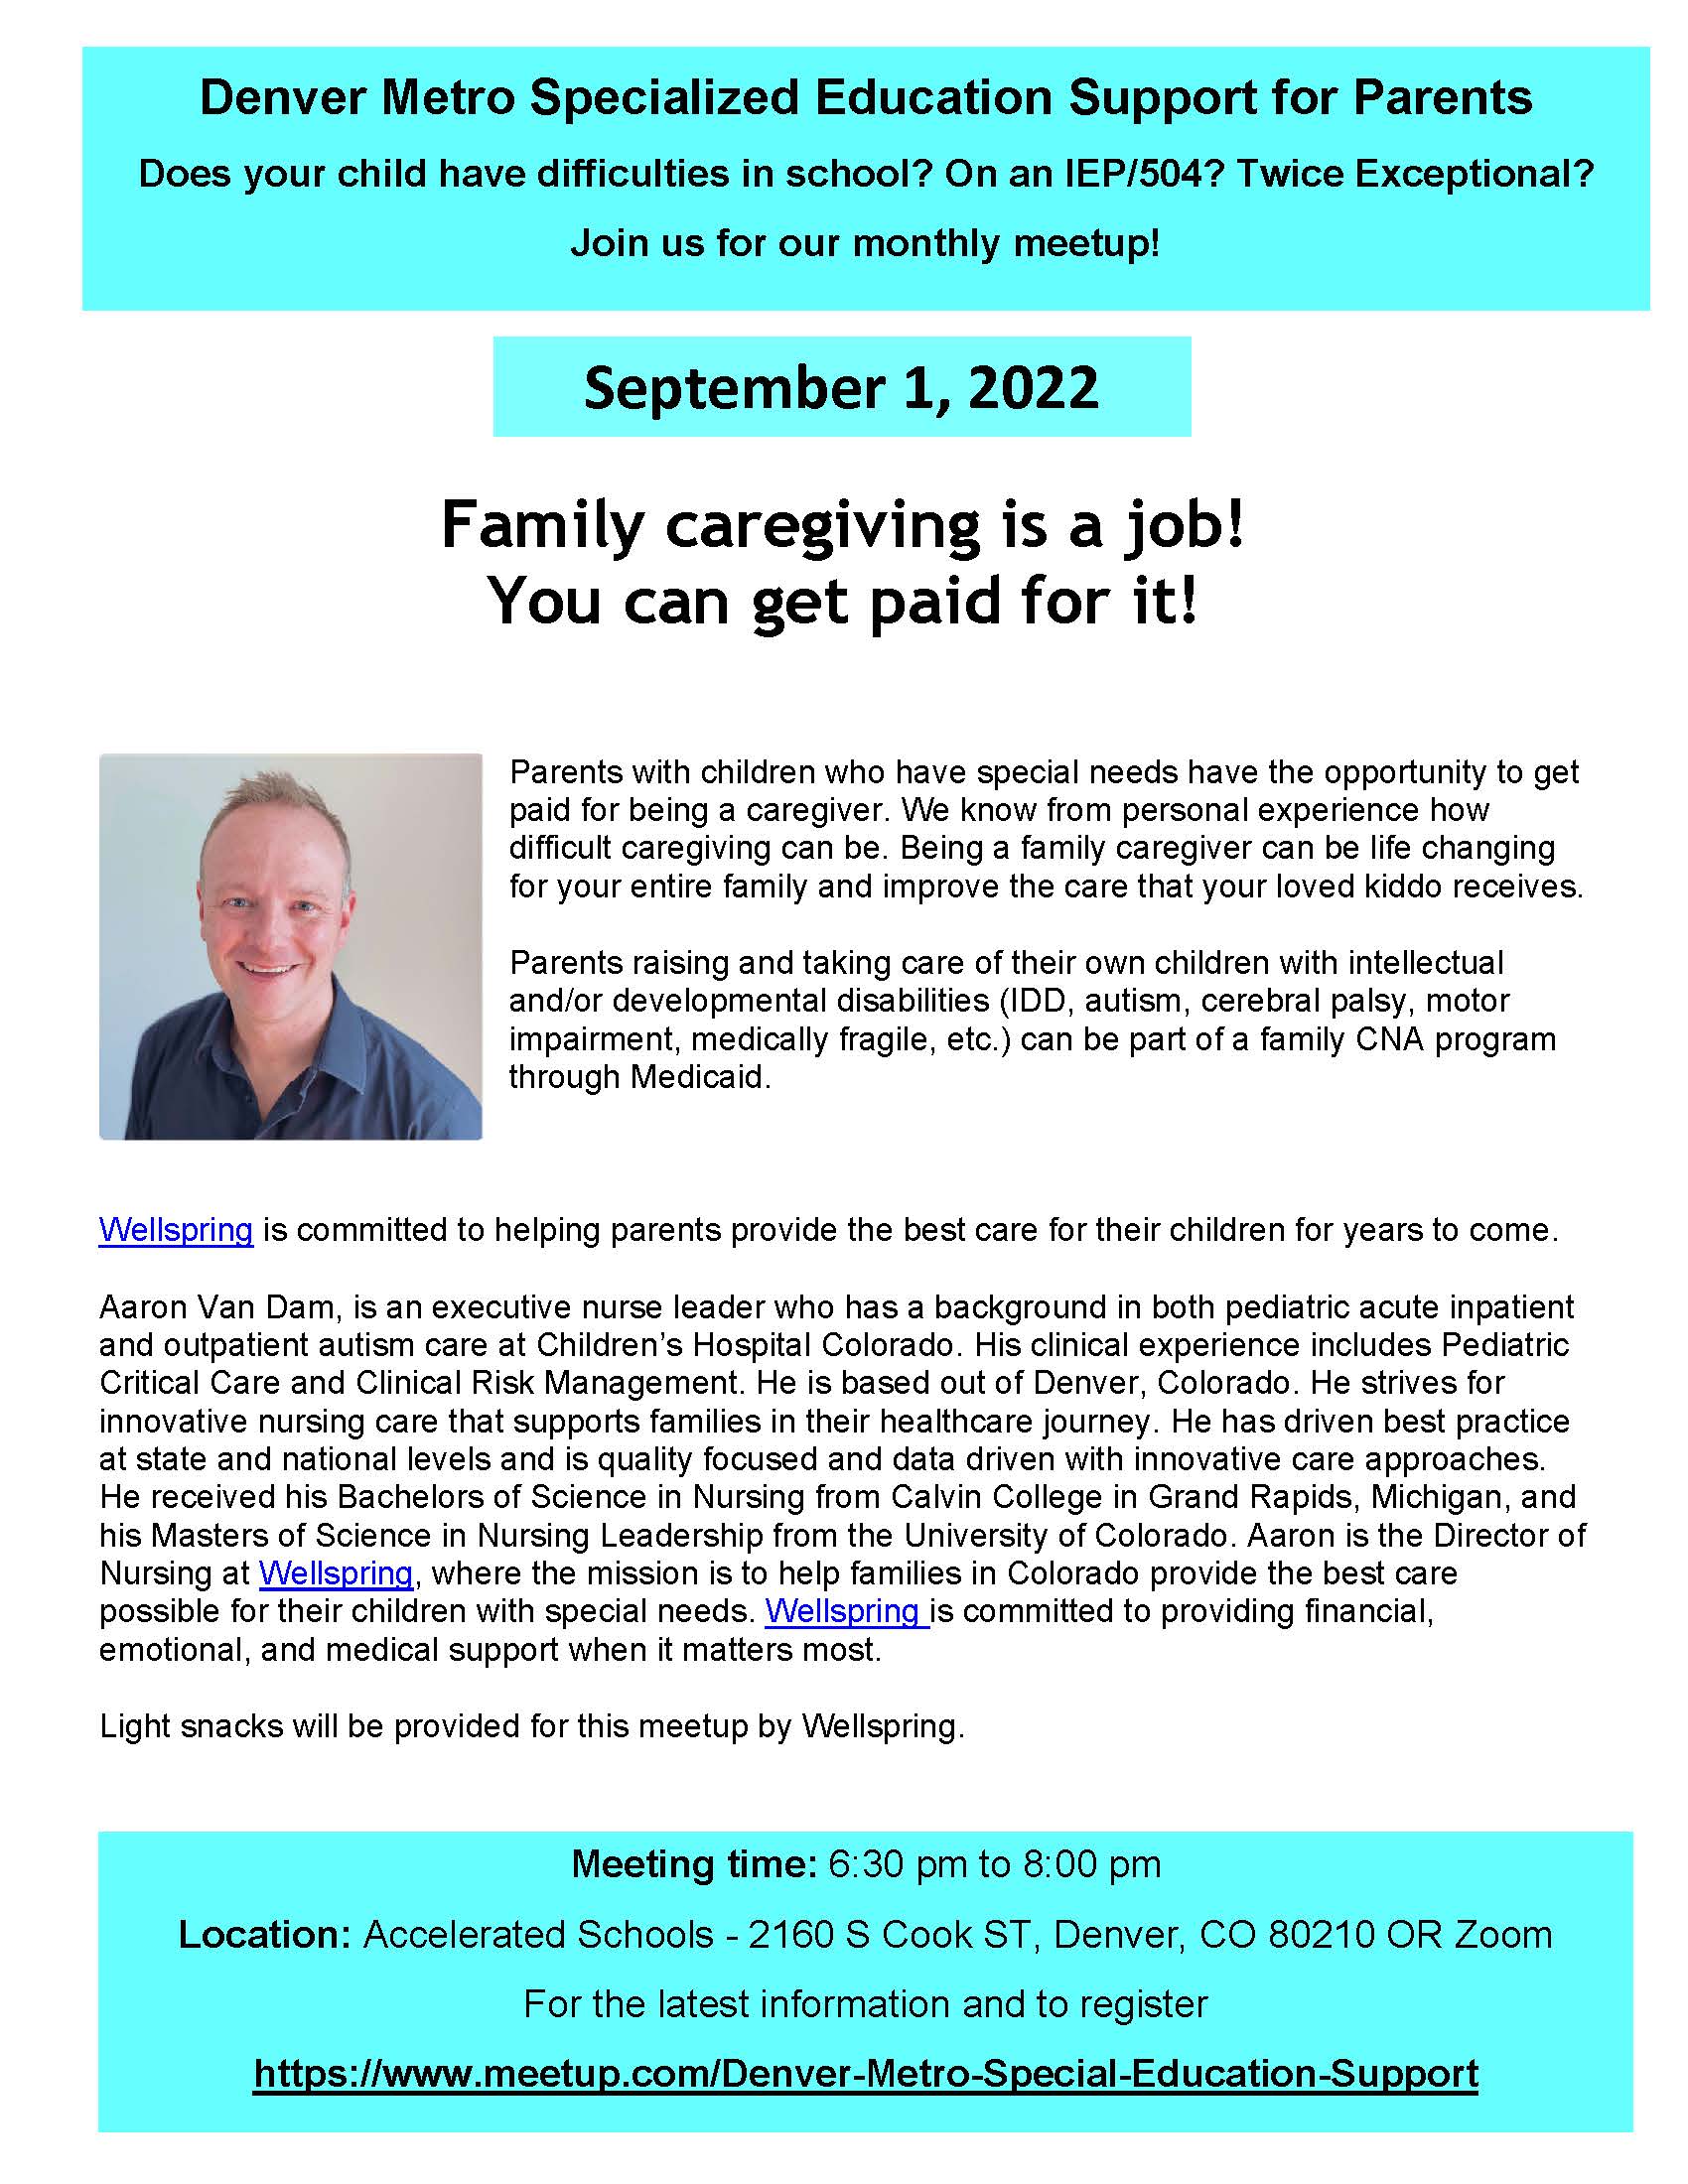 Man smiling in blue shirt on teal and white colored flyer for SES family caregiving job ad